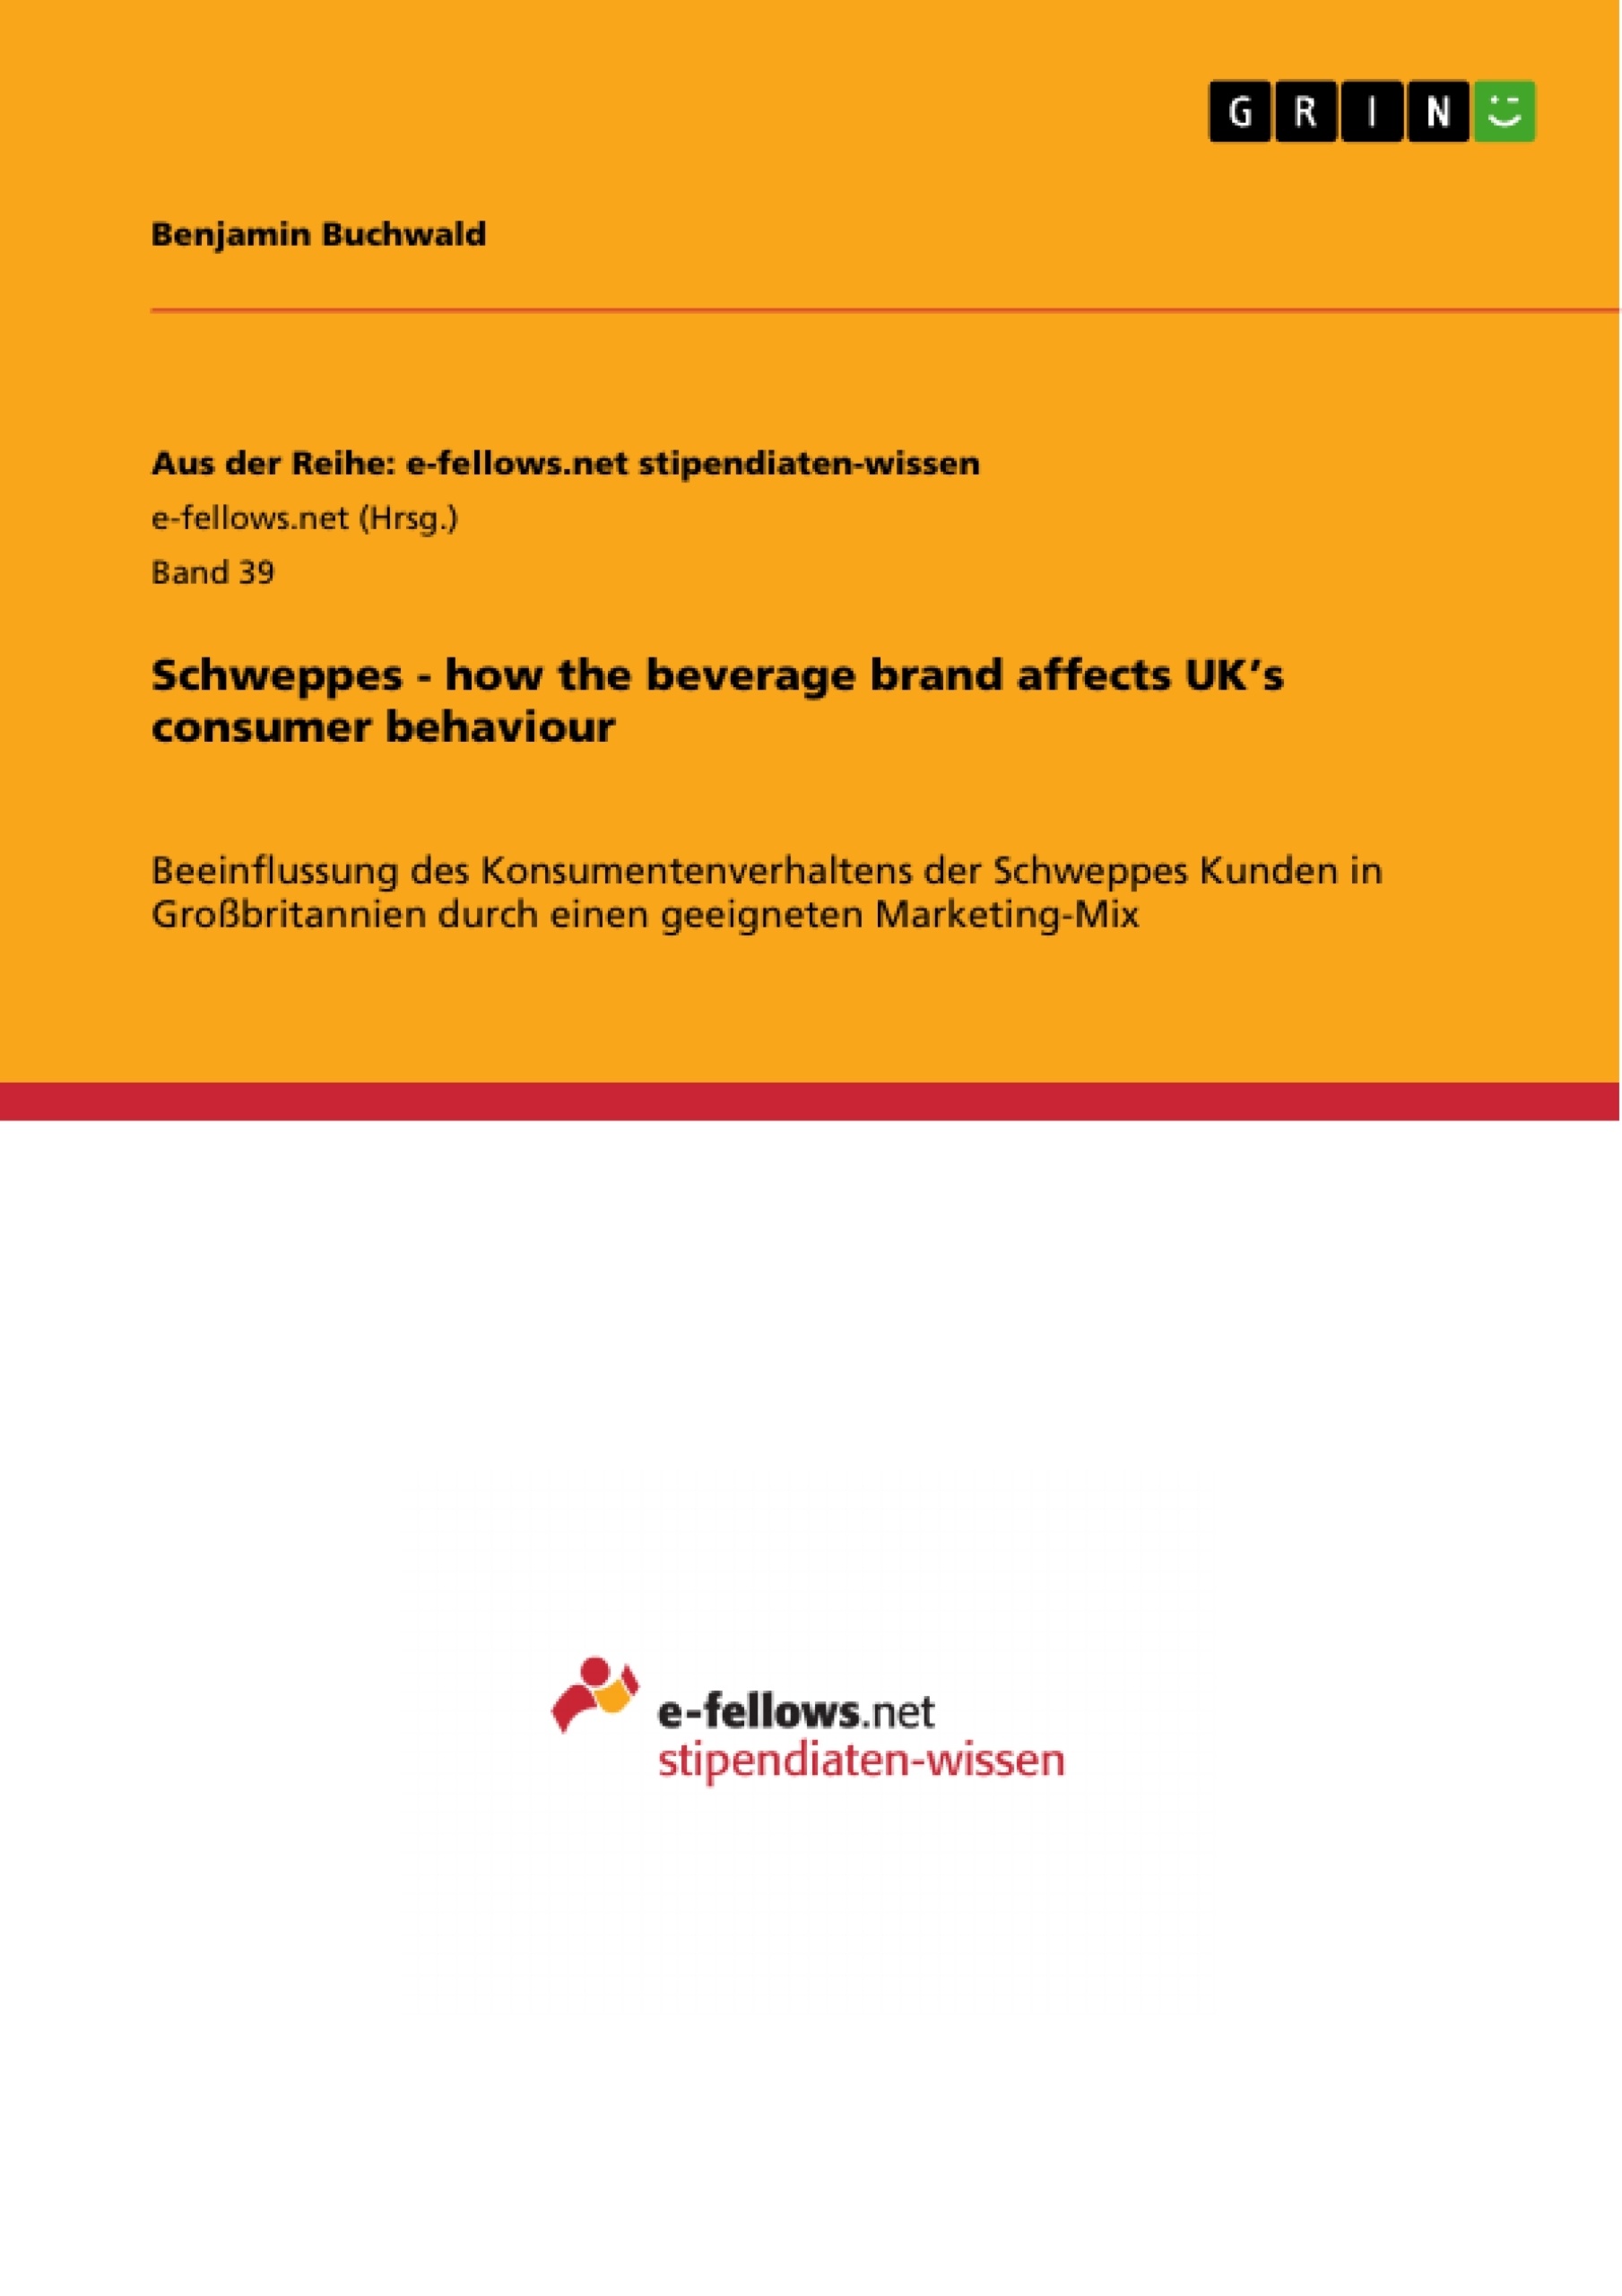 Título: Schweppes - how the beverage brand affects UK’s consumer behaviour